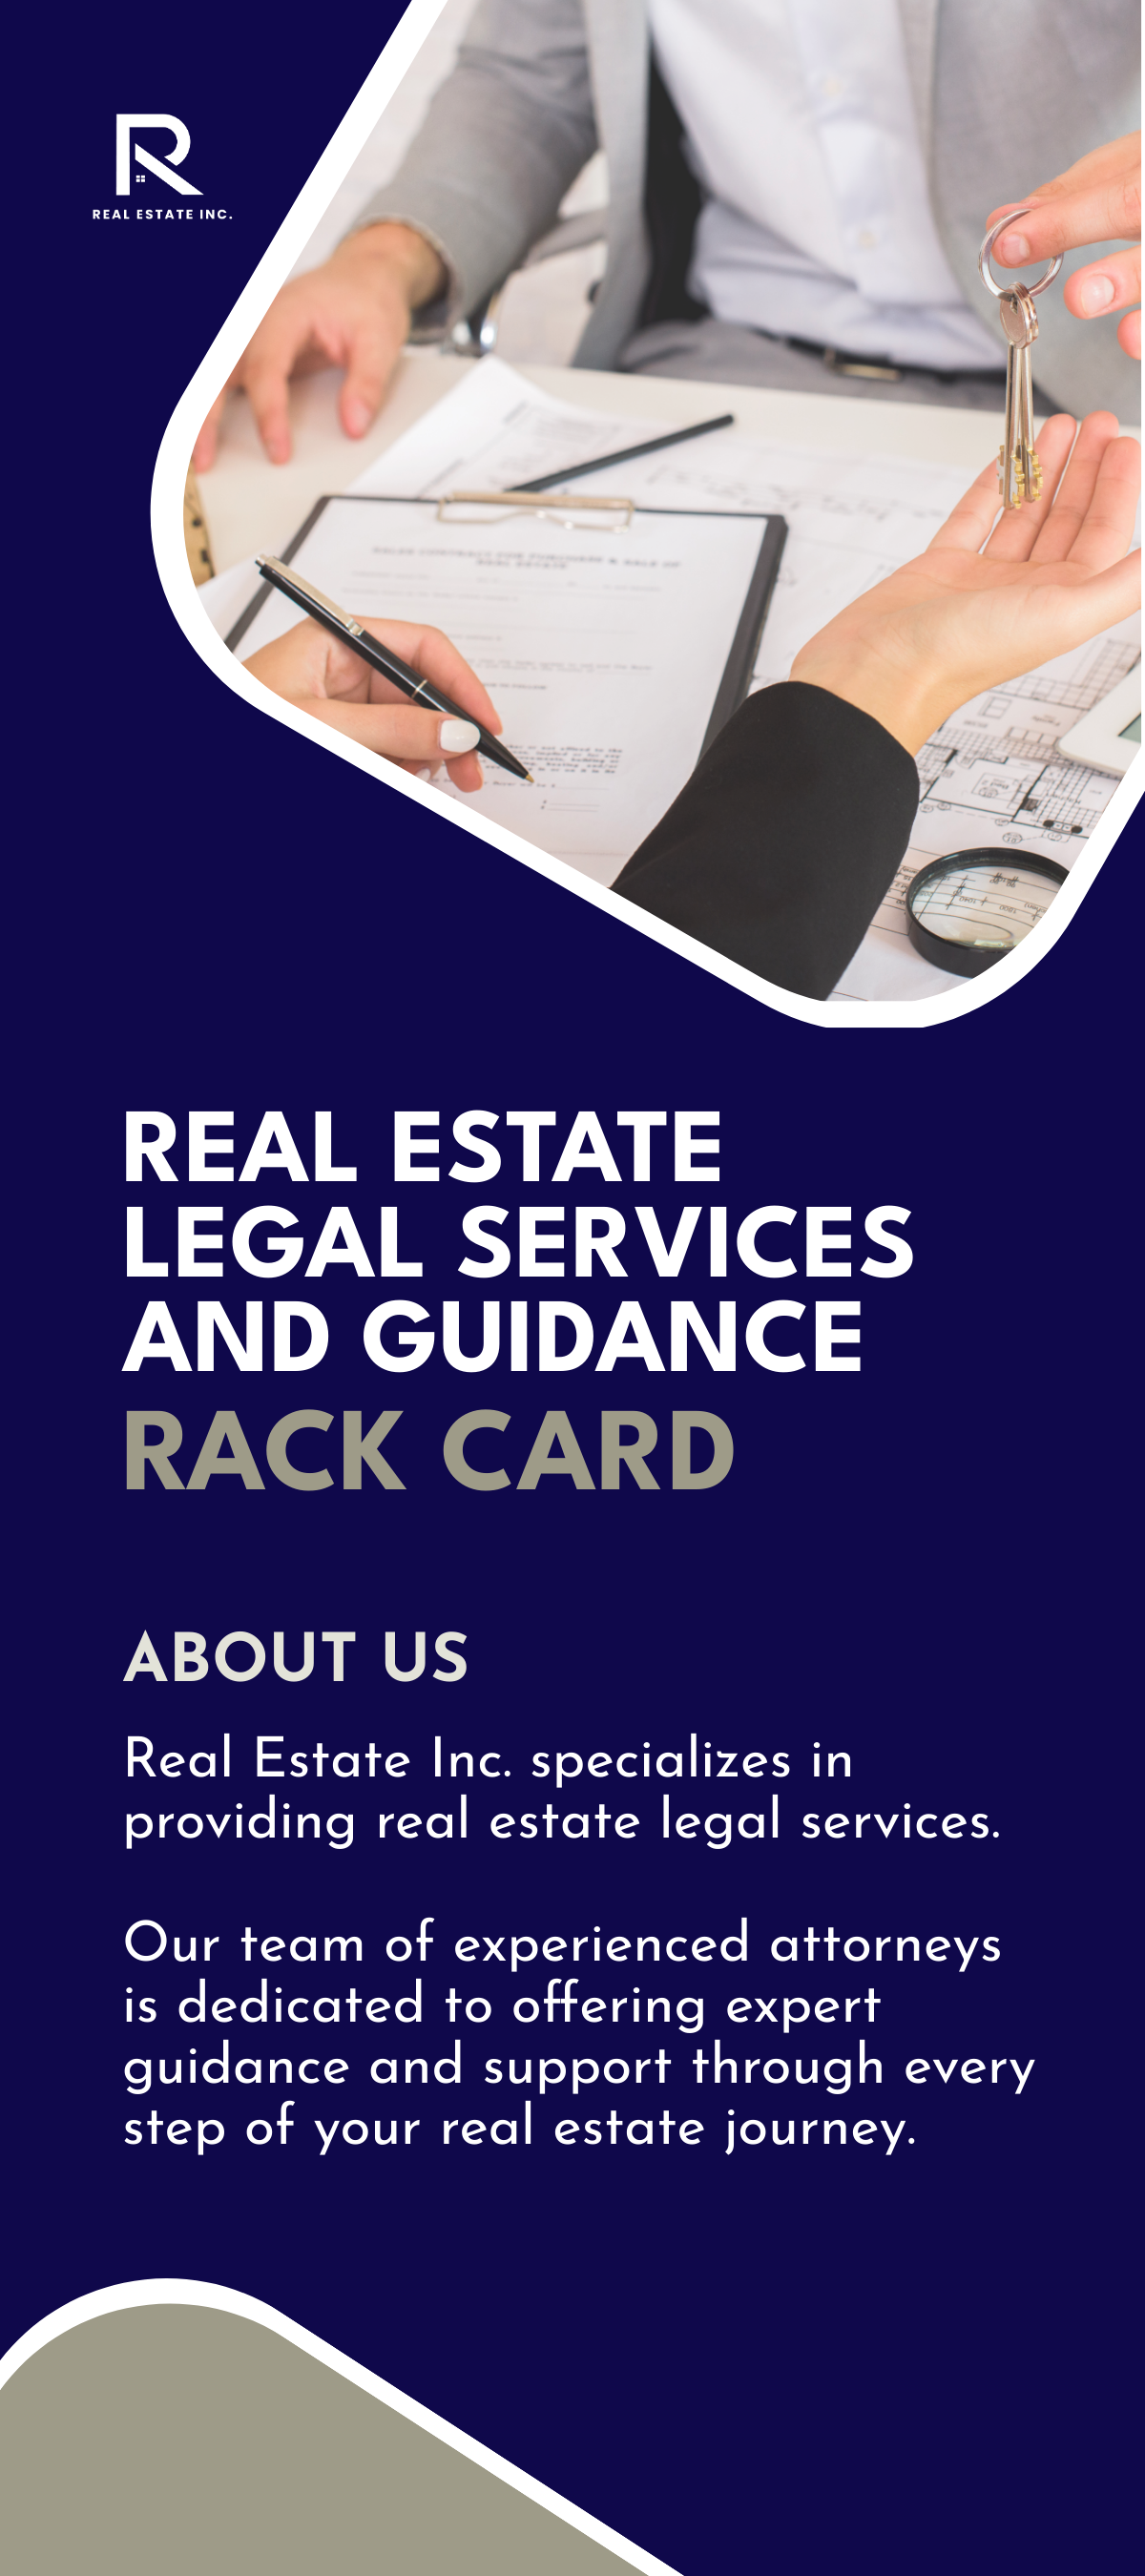 Real Estate Legal Services and Guidance Rack Card